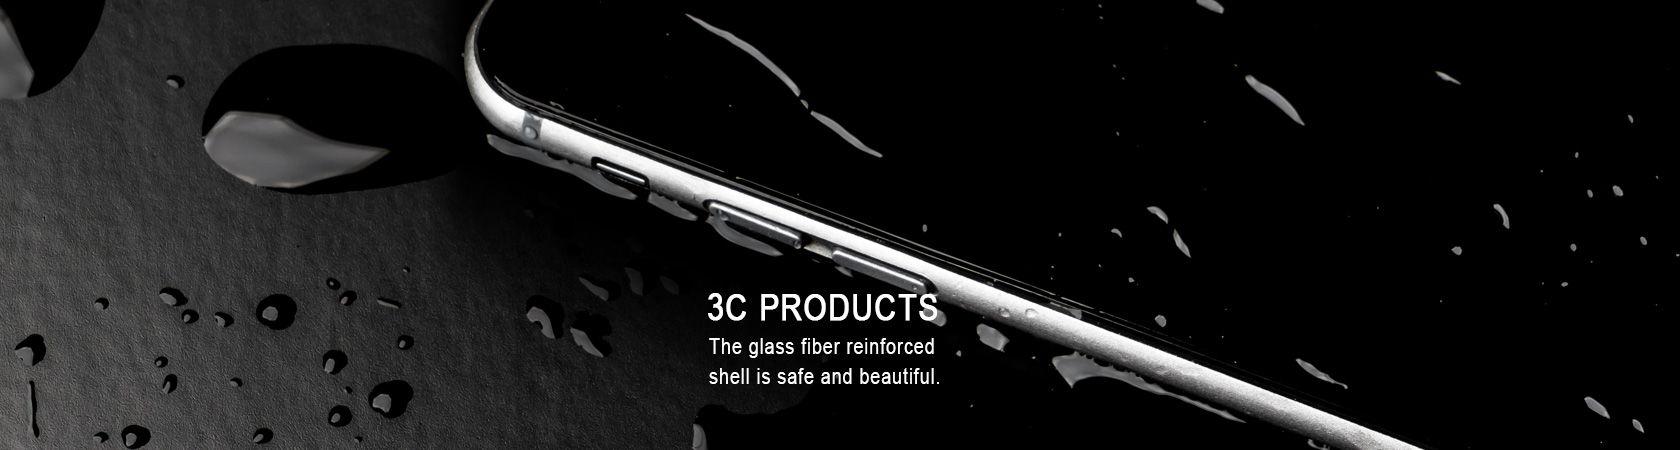 3C products 
The glass fiber reinforced shell is safe and beautiful.